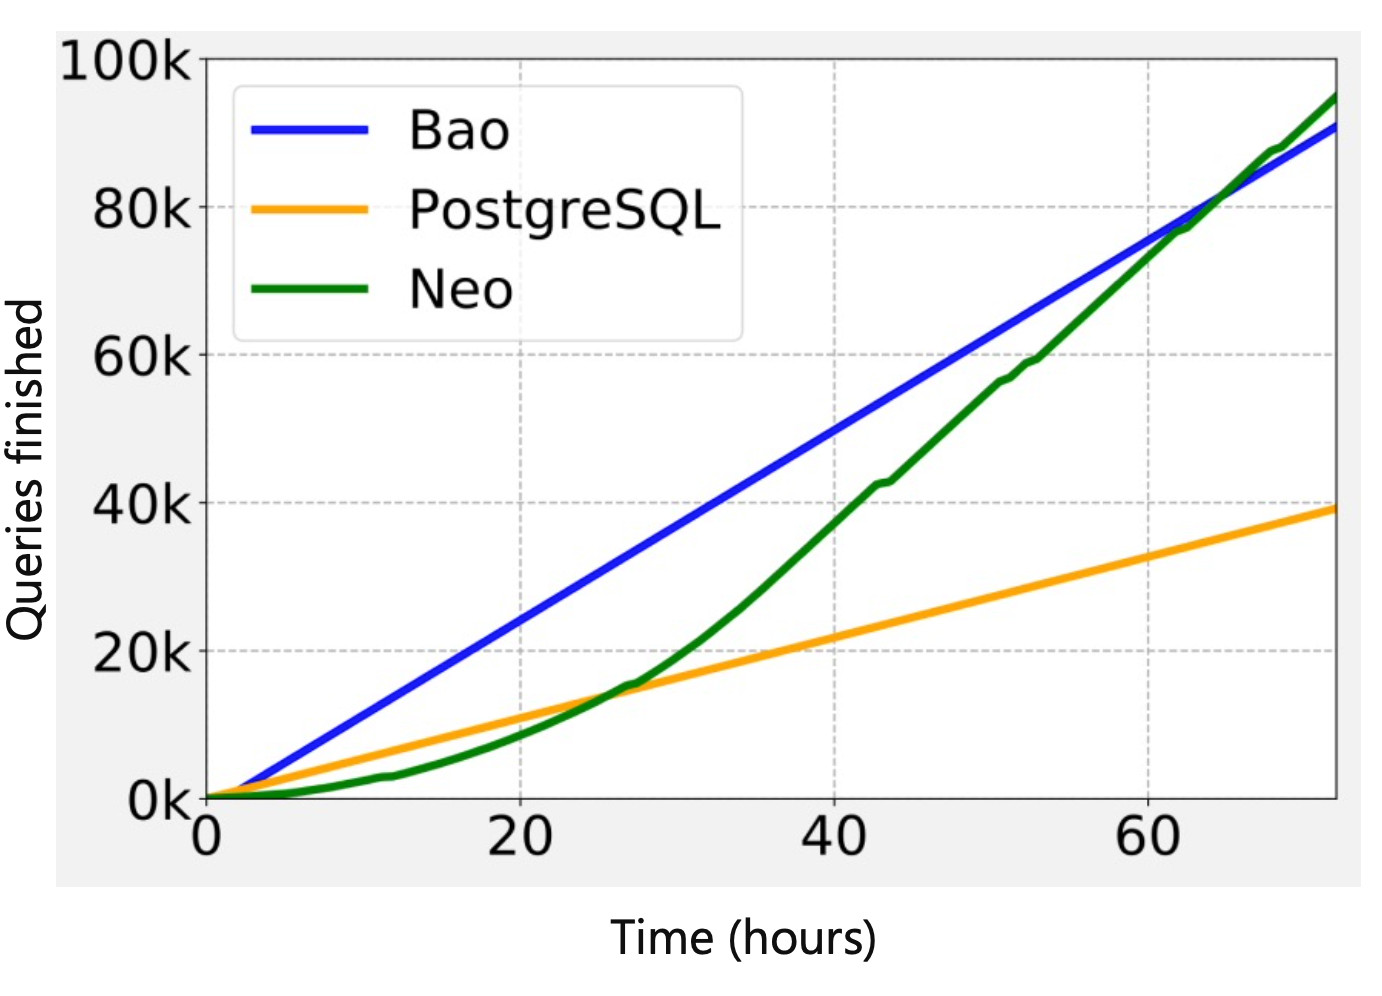 BAO gets better results initially but after about 60 hours of training, NEO beats it